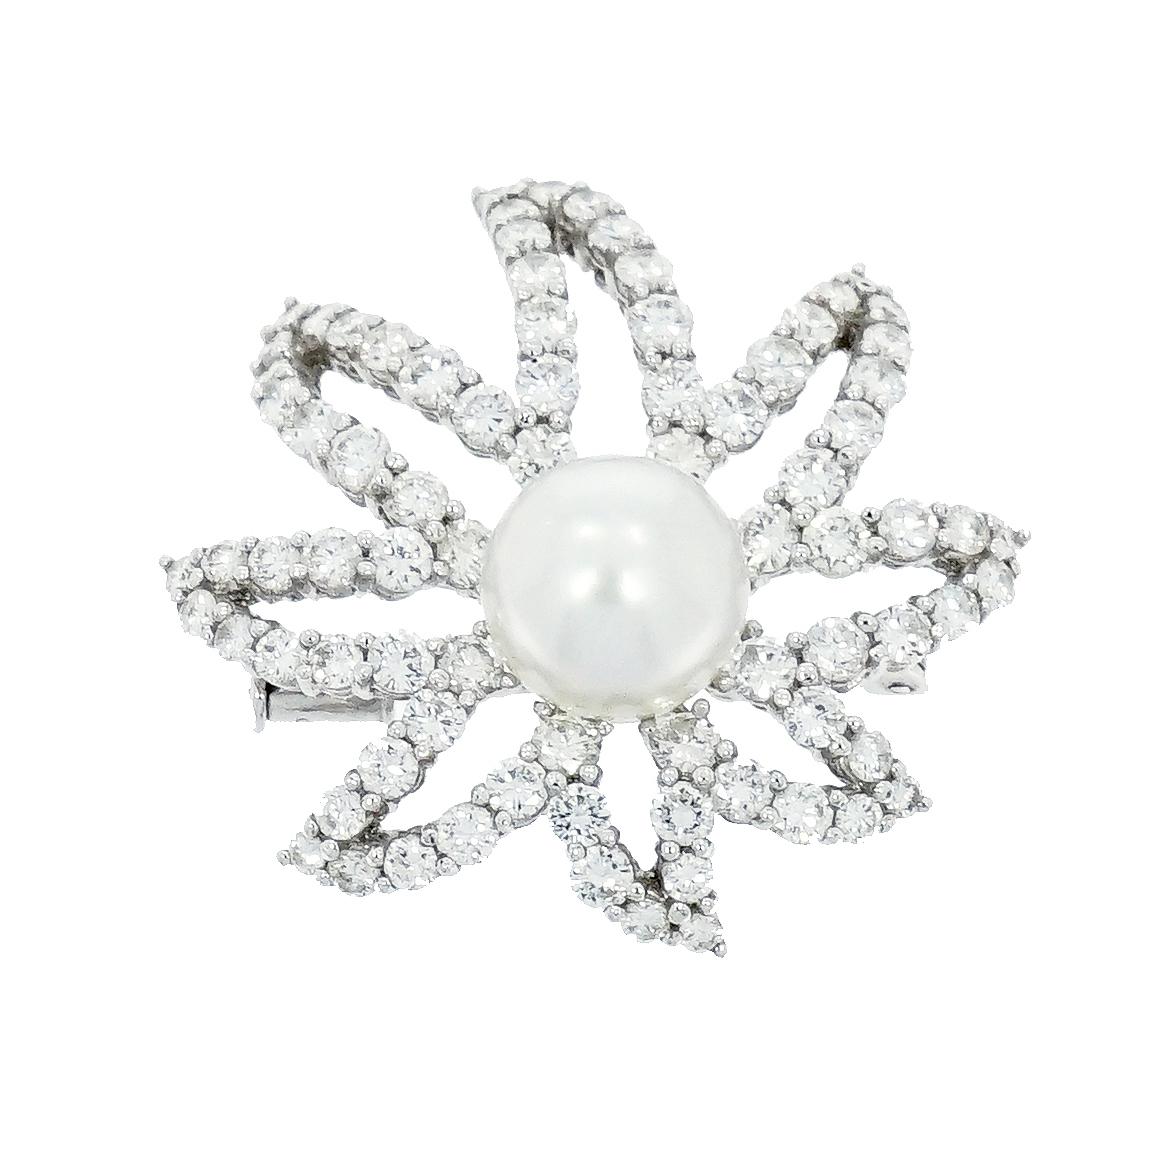 This stunning platinum floral brooch exemplifies classic jewelry, with petals which are set with 80 fine round brilliant-cut diamonds, weighing 5.22 carats and centered by an exquisite 10.5mm white pearl. 